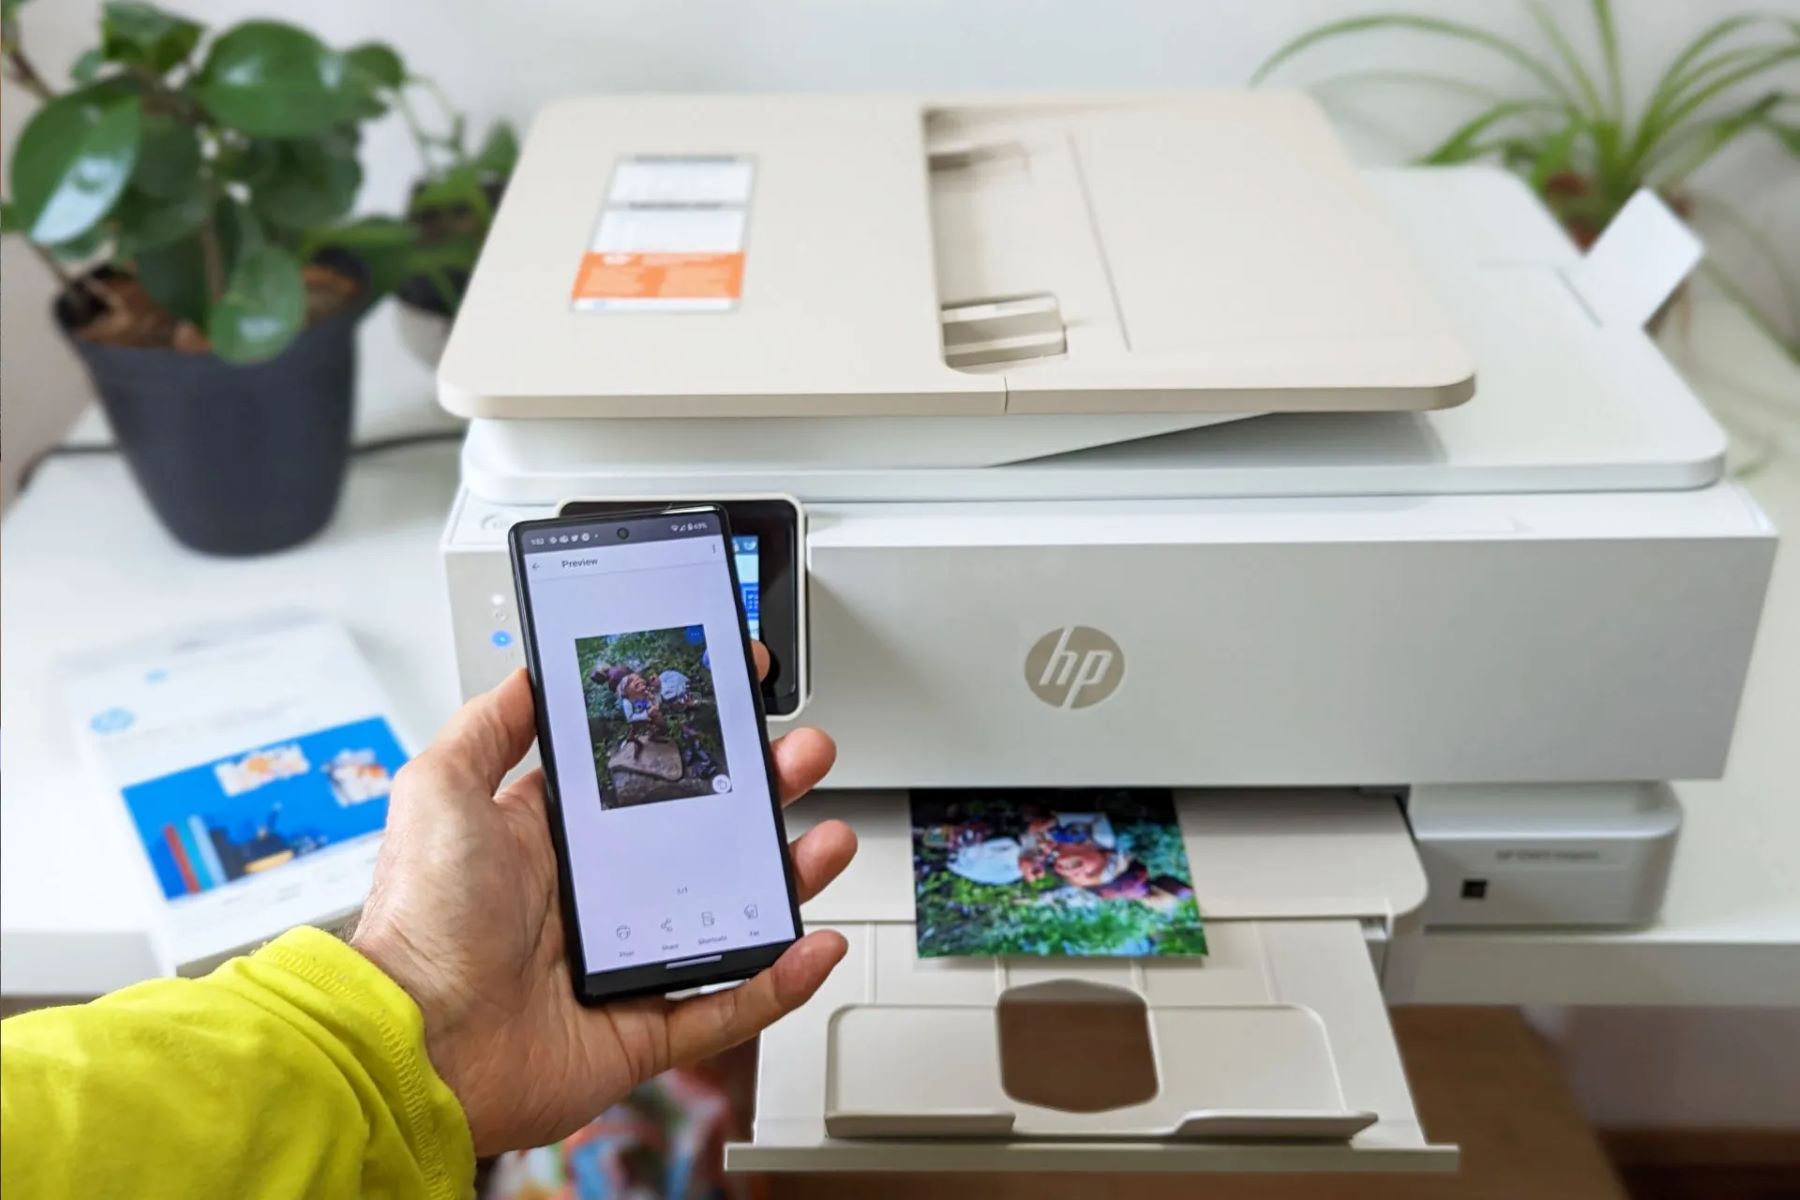 Mobile Phone Printing: A Guide For HP Printers